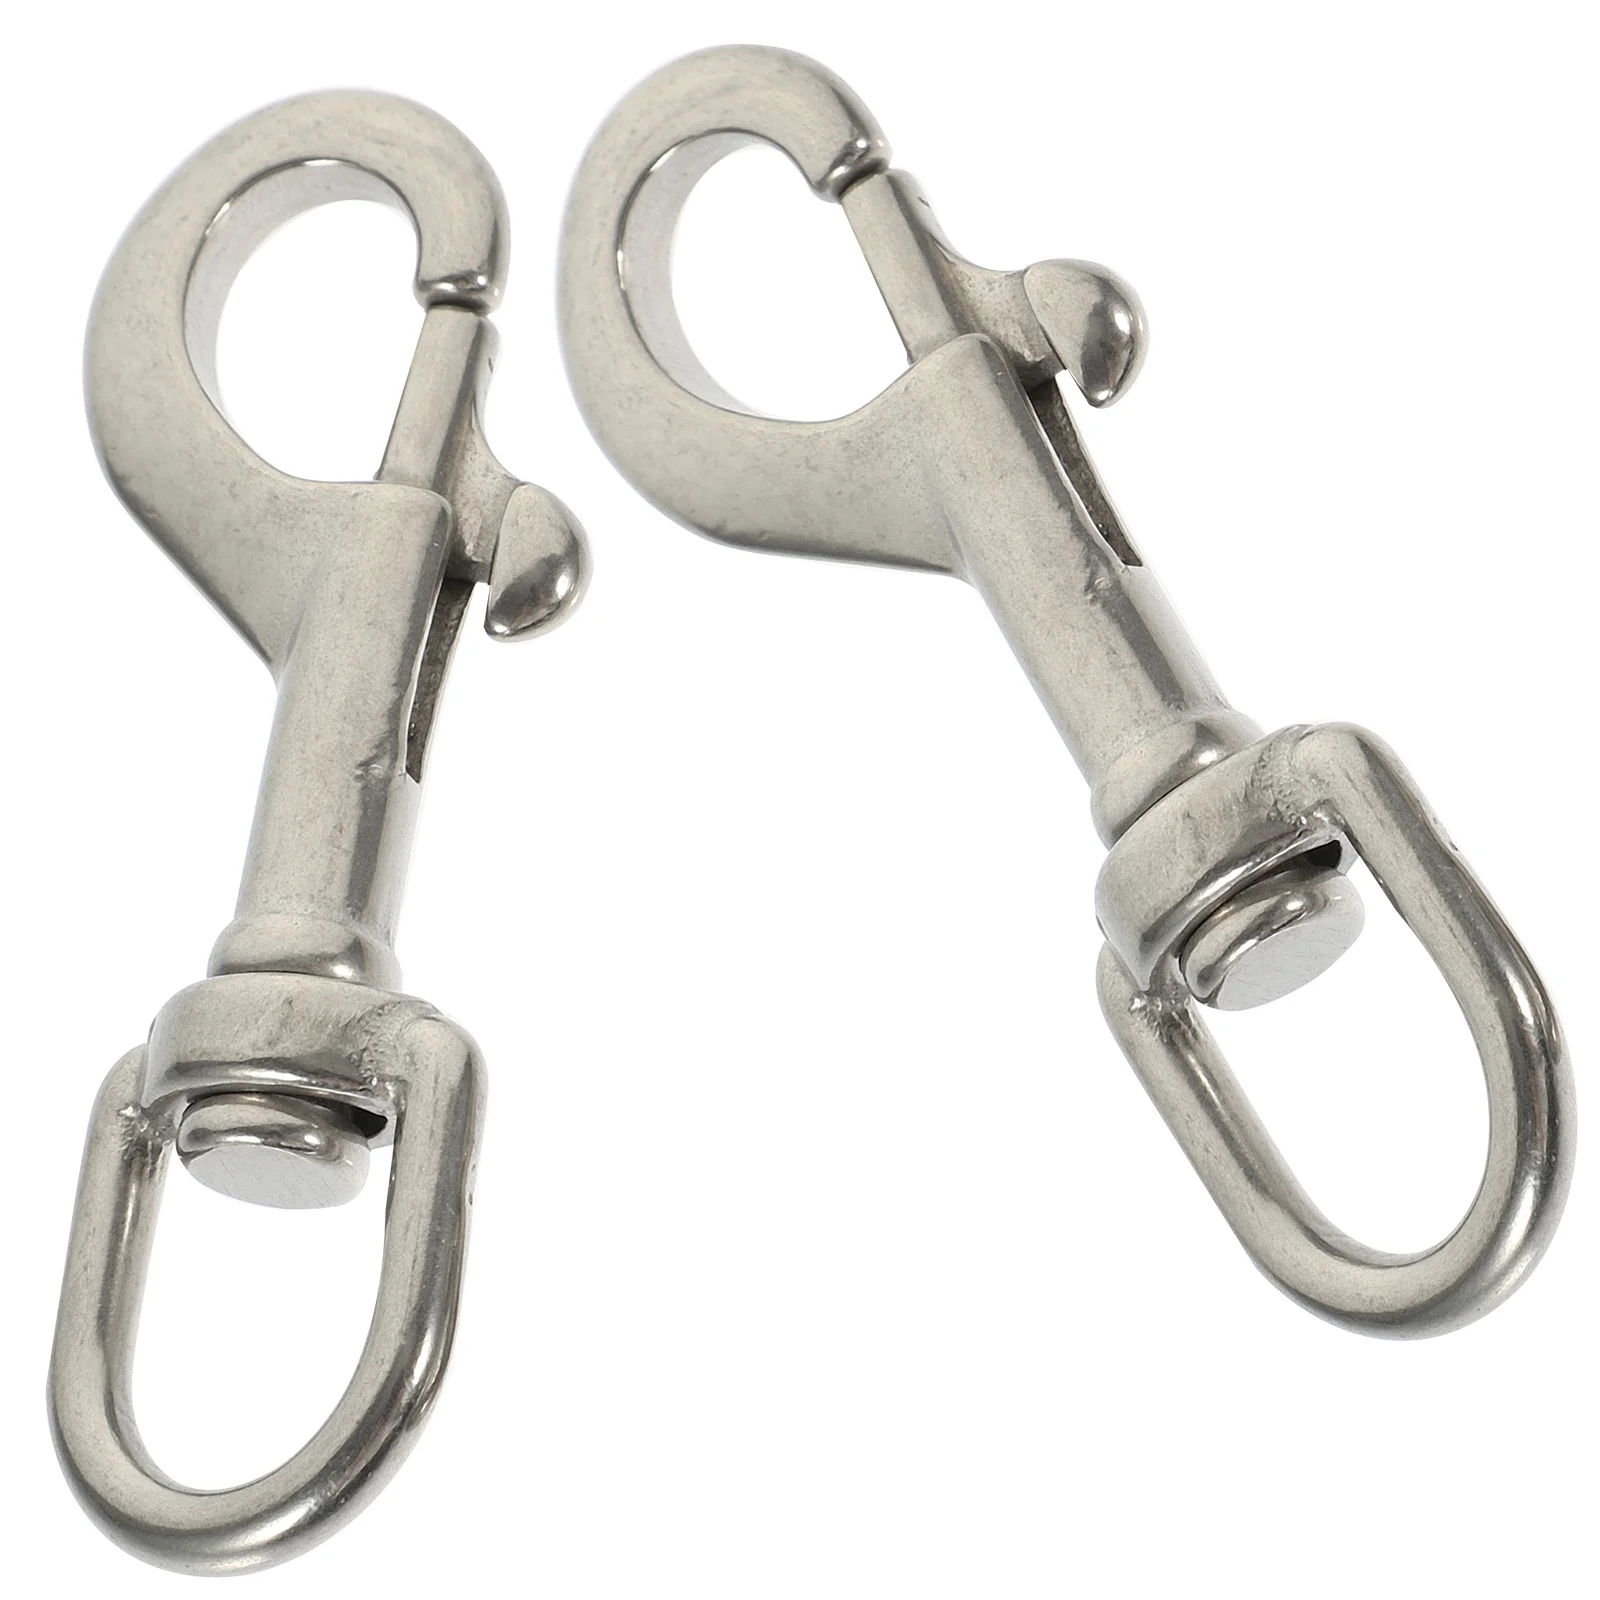 

2 Pcs Cable Hooks Swivel Heavy Rotating Underwater Bolt Snap 316 Stainless Steel Trigger